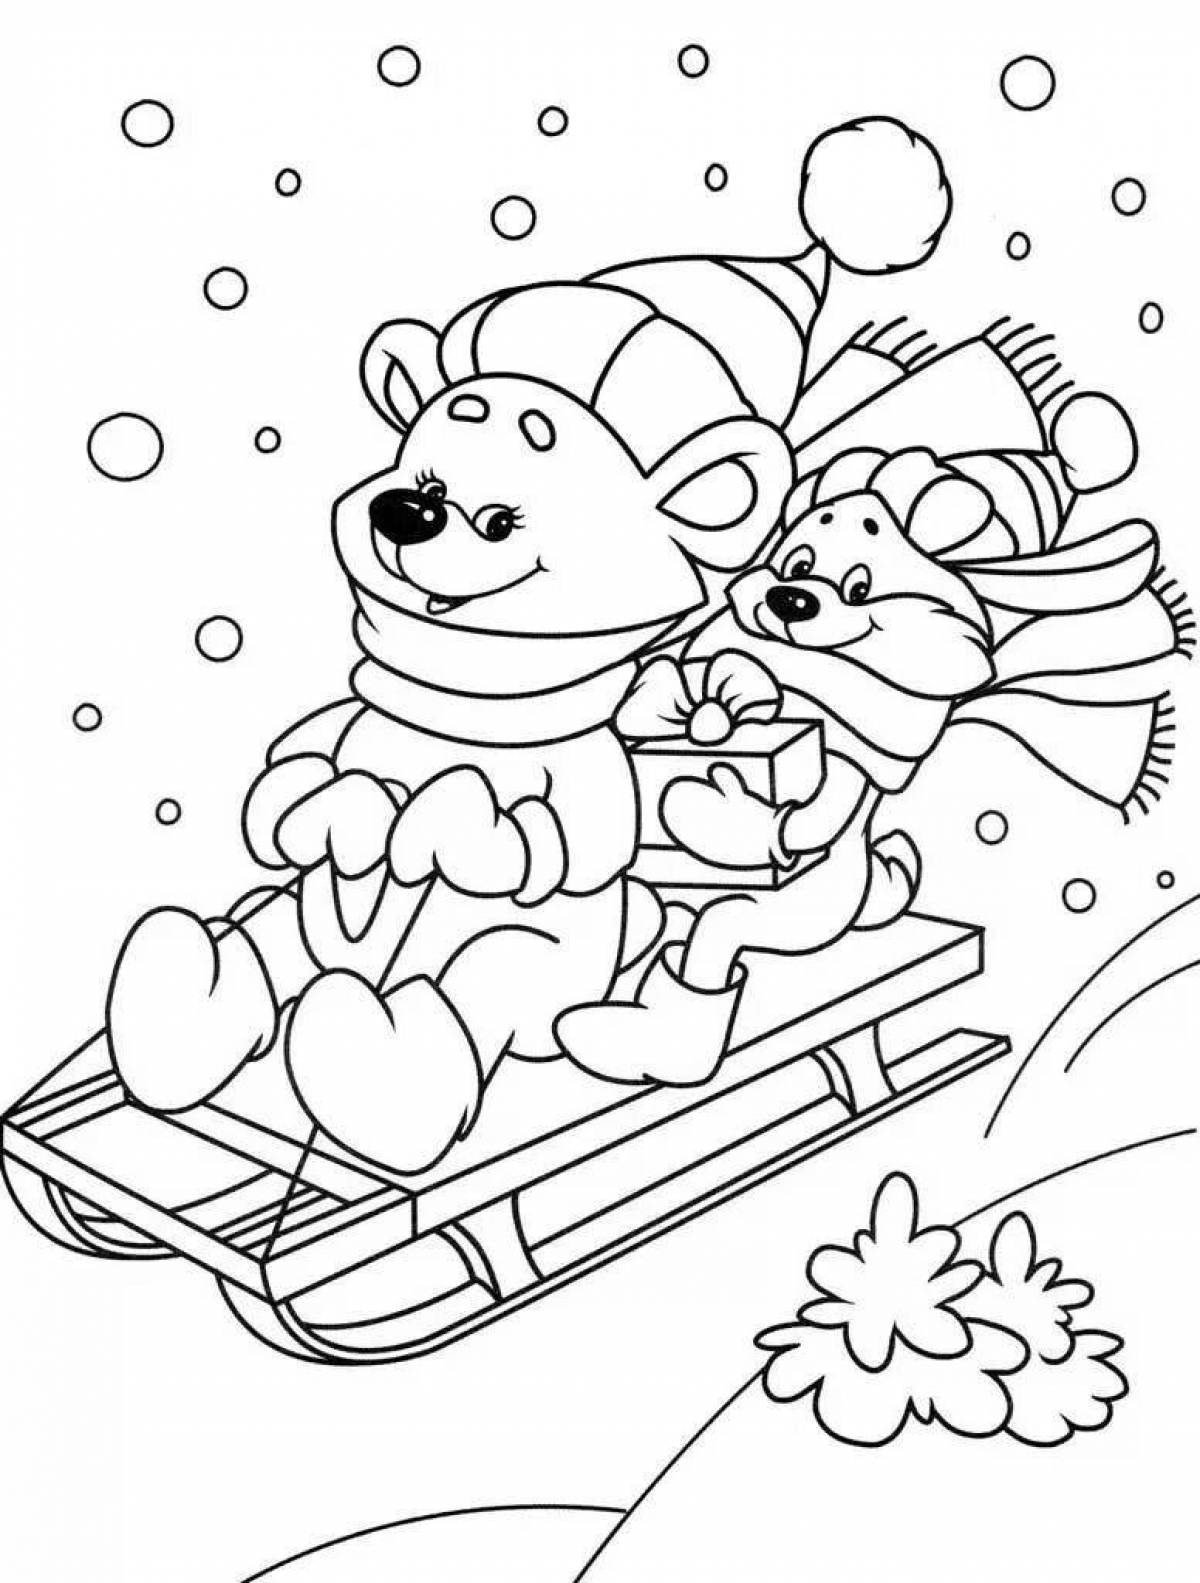 Incredible winter coloring book for kids